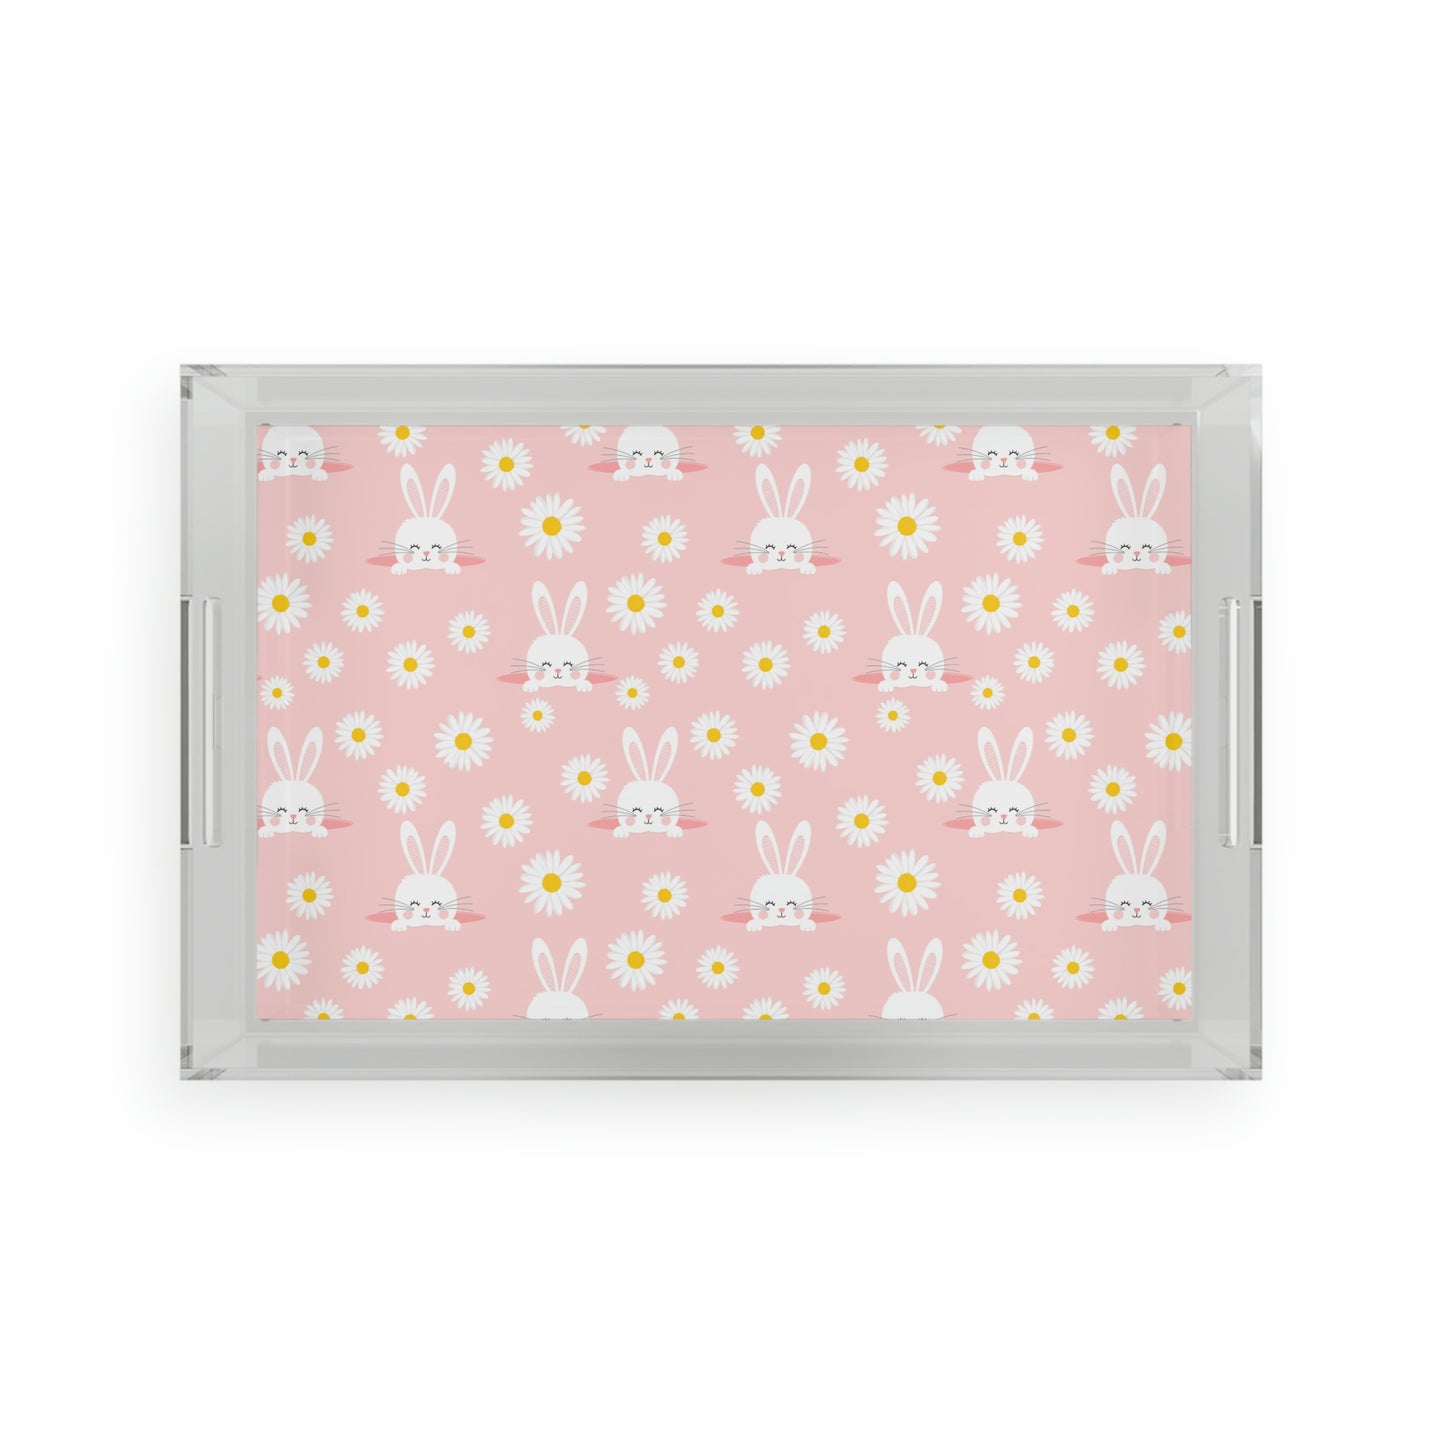 Smiling Bunnies and Daises Acrylic Serving Tray